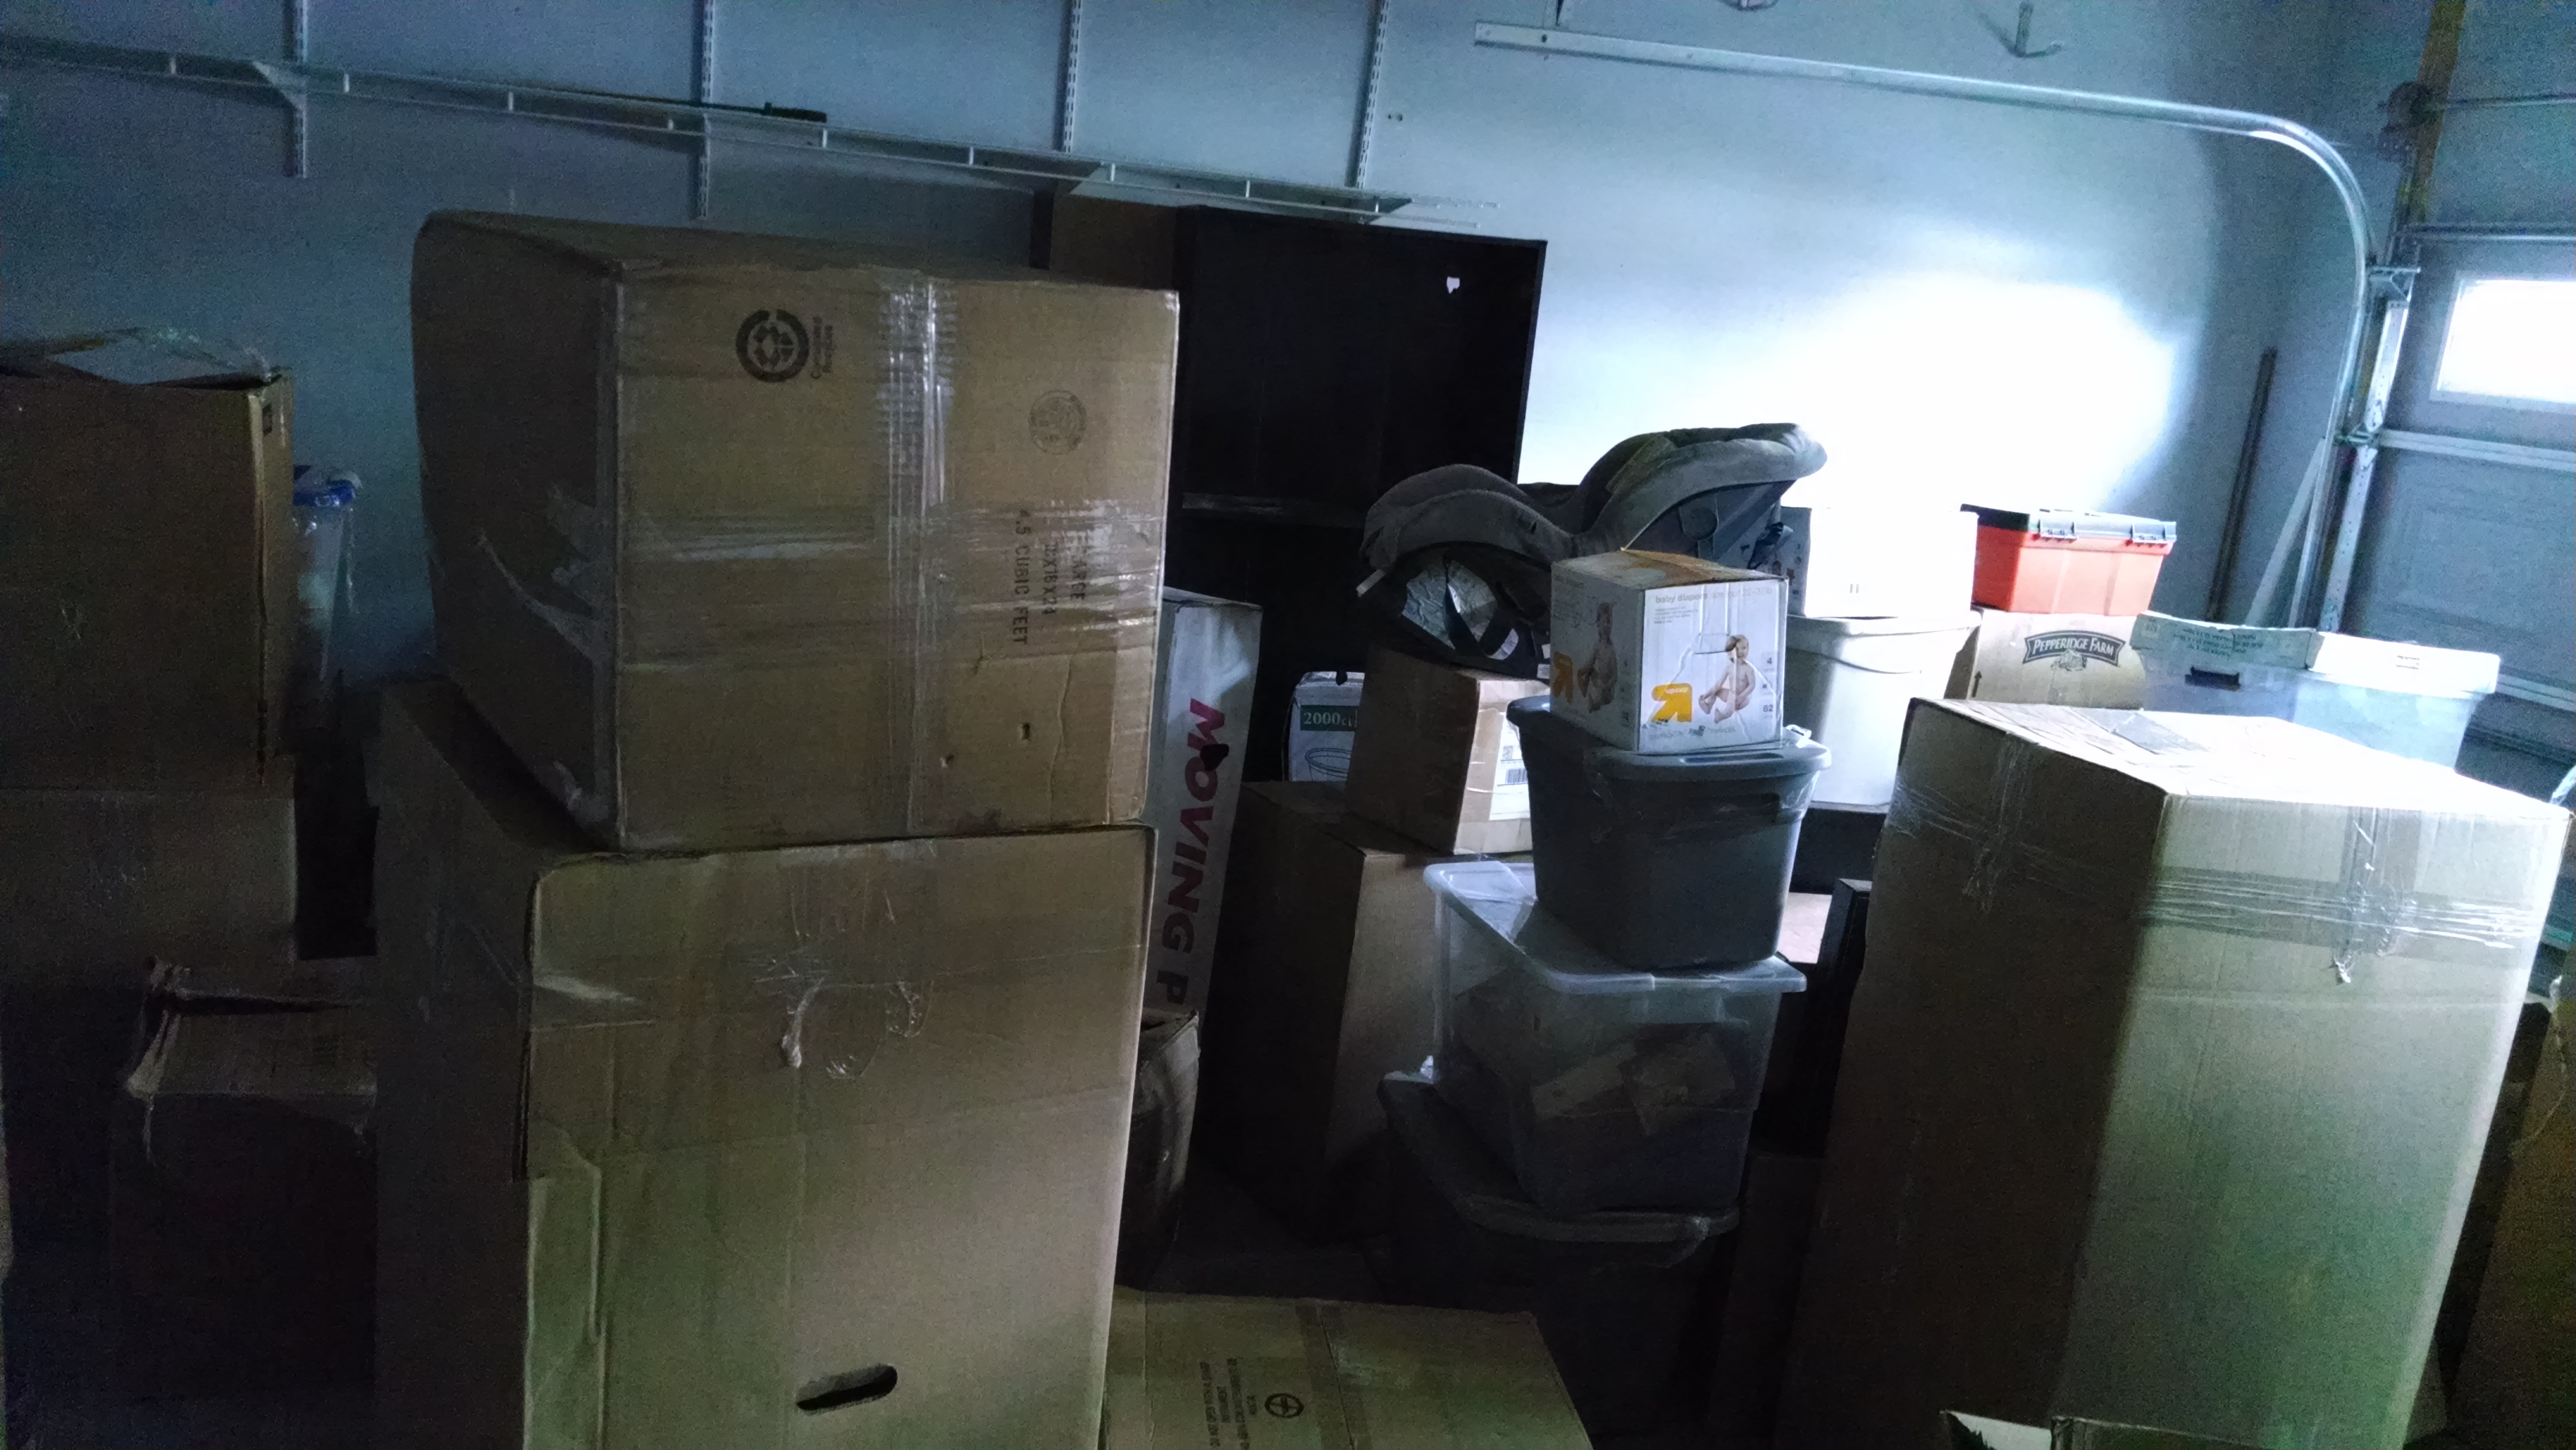 All of my boxes are in the garage instead of in the appropriate rooms. I paid 10k for a full service move, yet they lied and are lazy